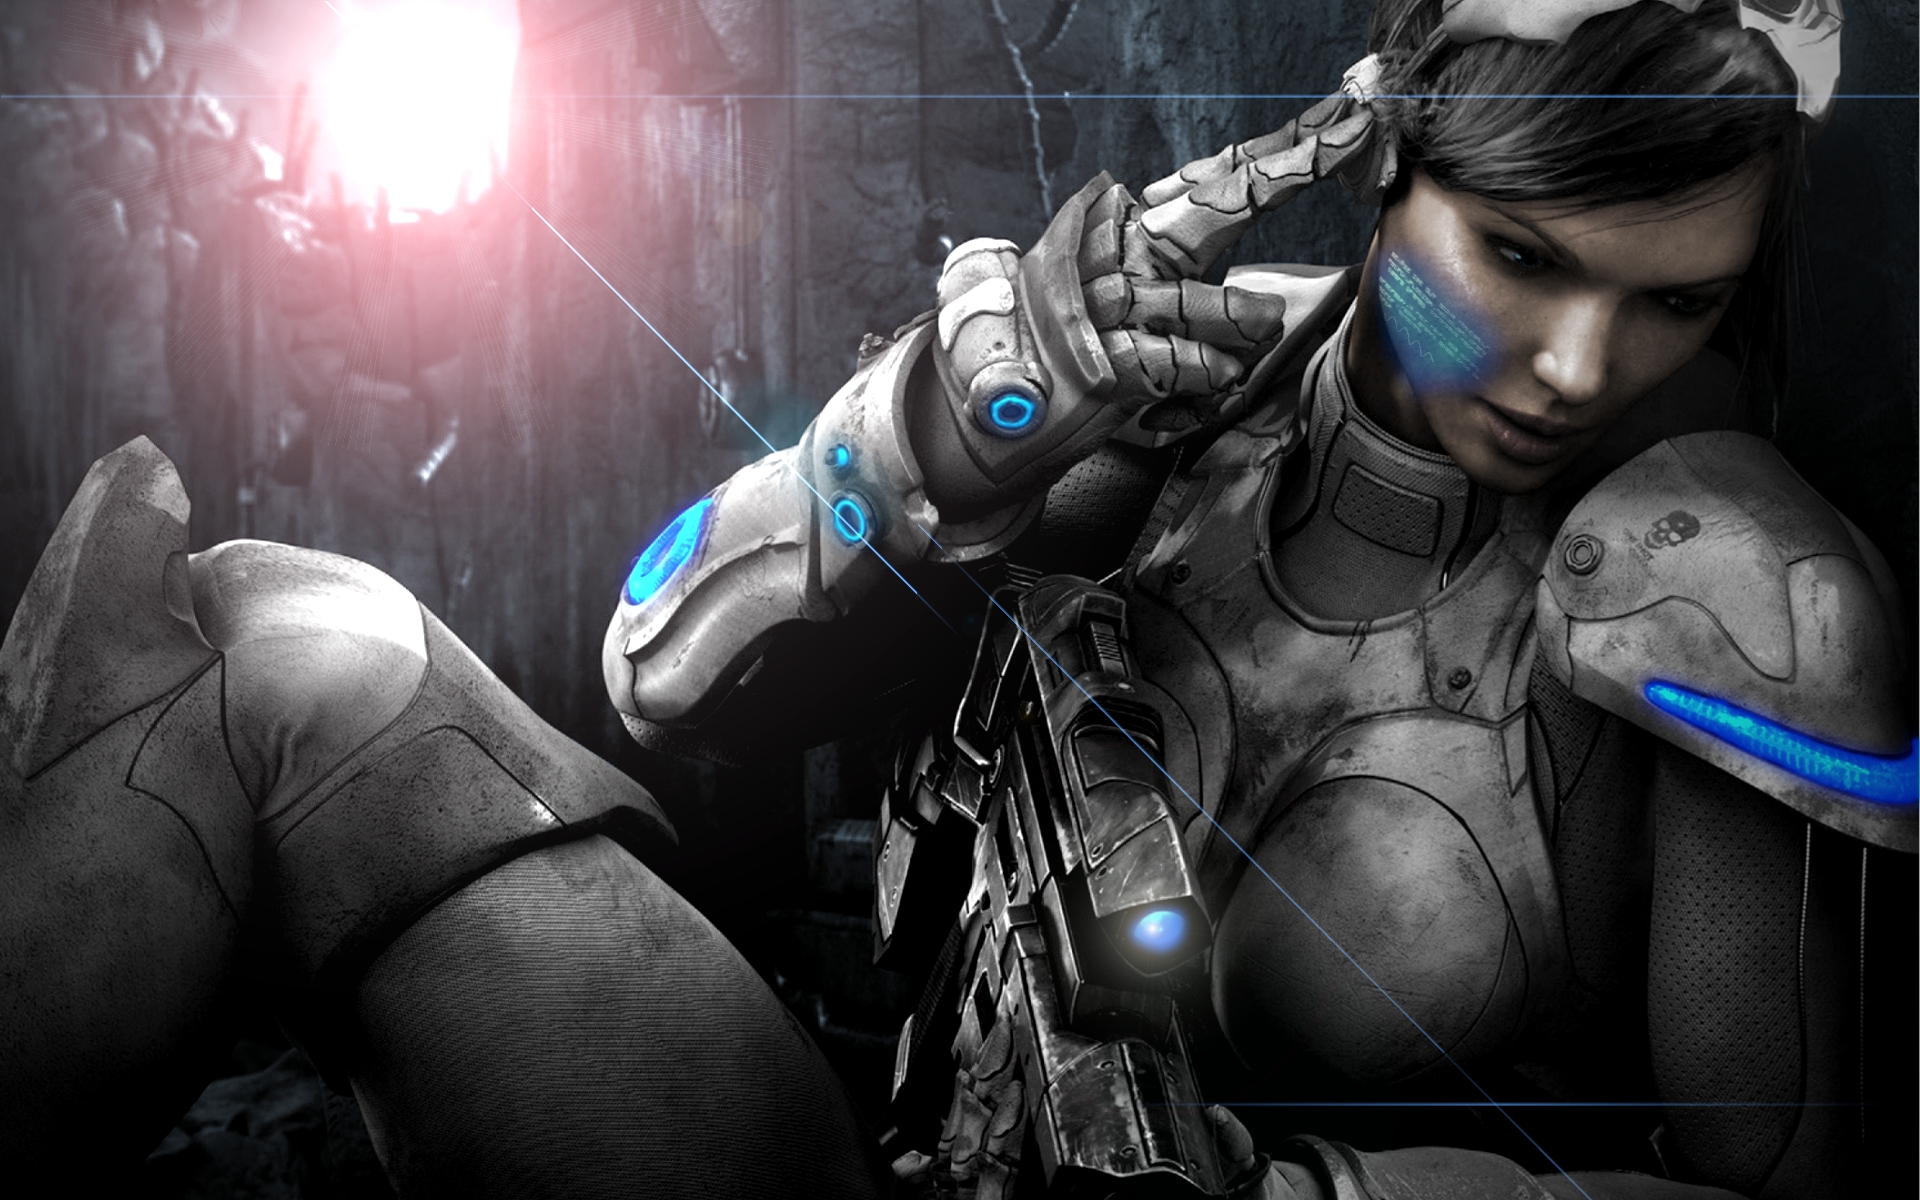 starcraft 2 wallpaper 1920x1080,action adventure game,pc game,fictional character,cg artwork,games